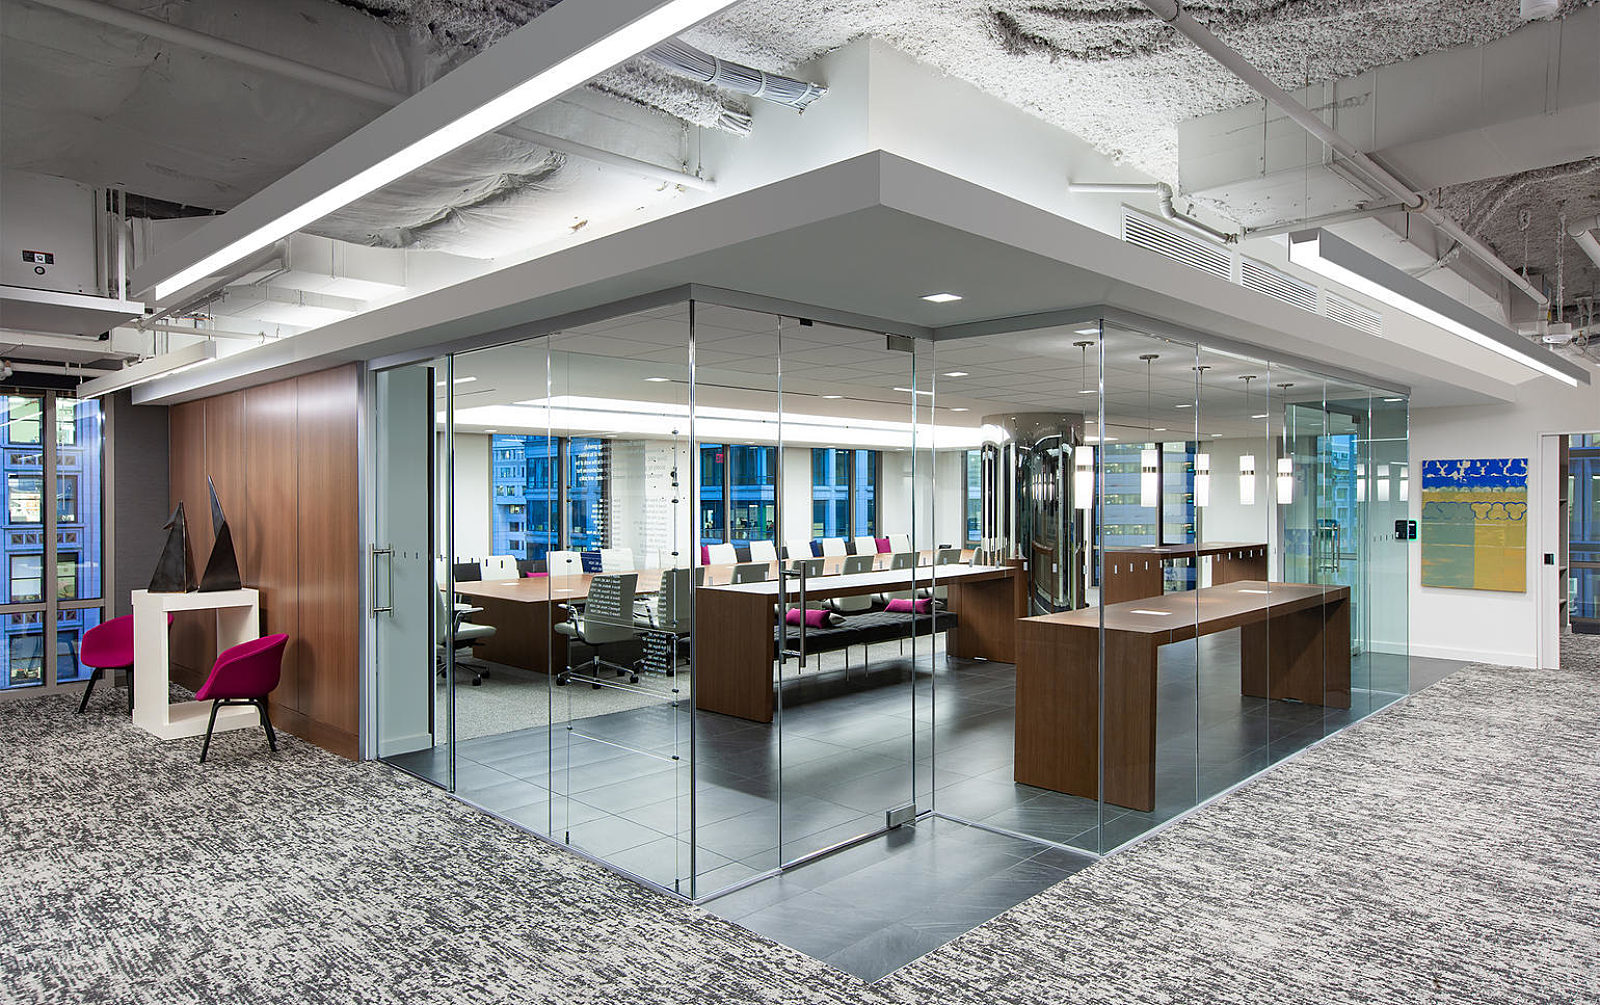 Corner perspective of a center room with full glass walls and doors; dark wood collaborative and conference tables inside room. Pops of magenta throughout